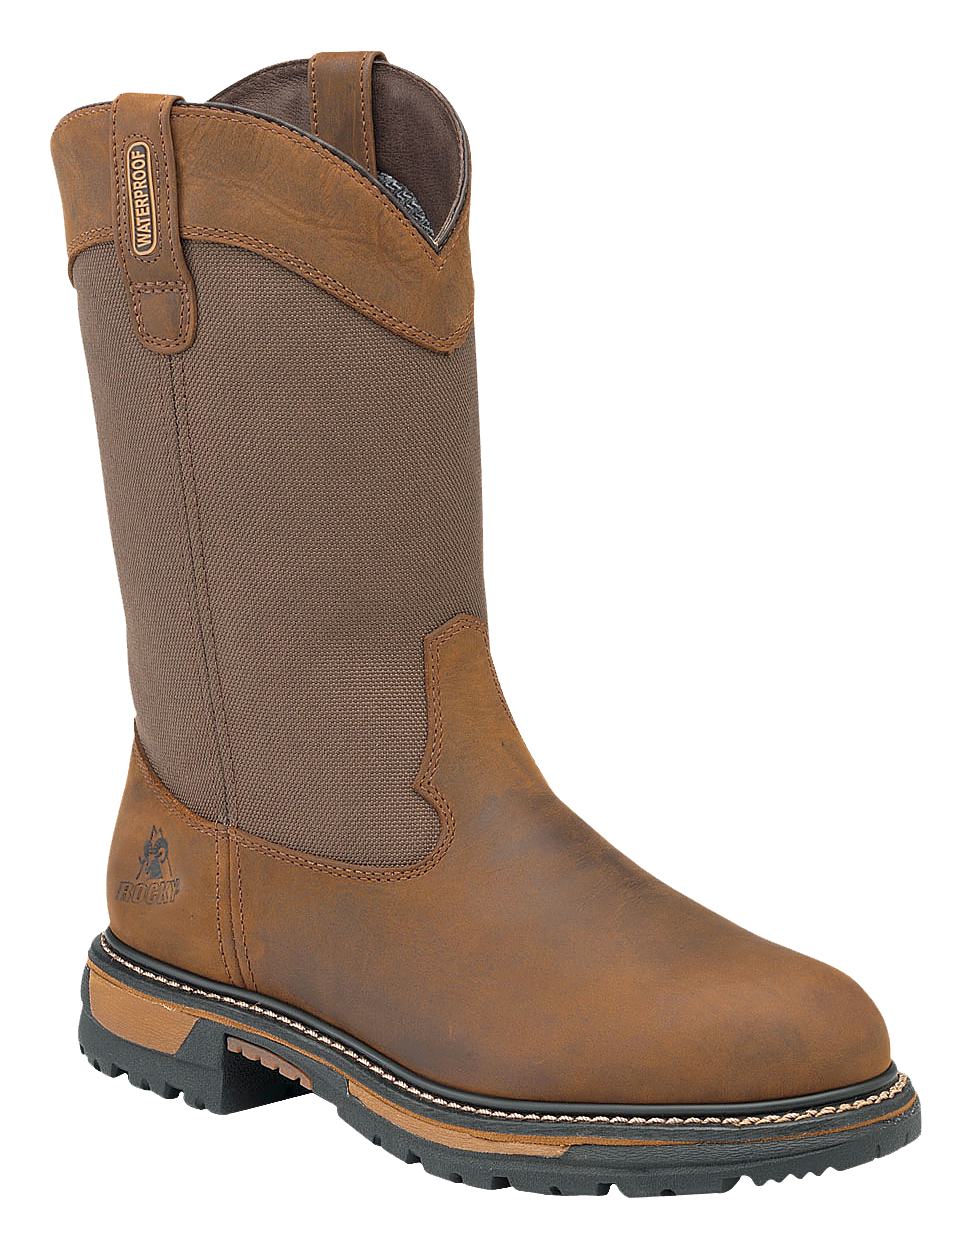 ROCKY Ride Insulated Waterproof Wellington Work Boots for Men - Brown - 9.5 M